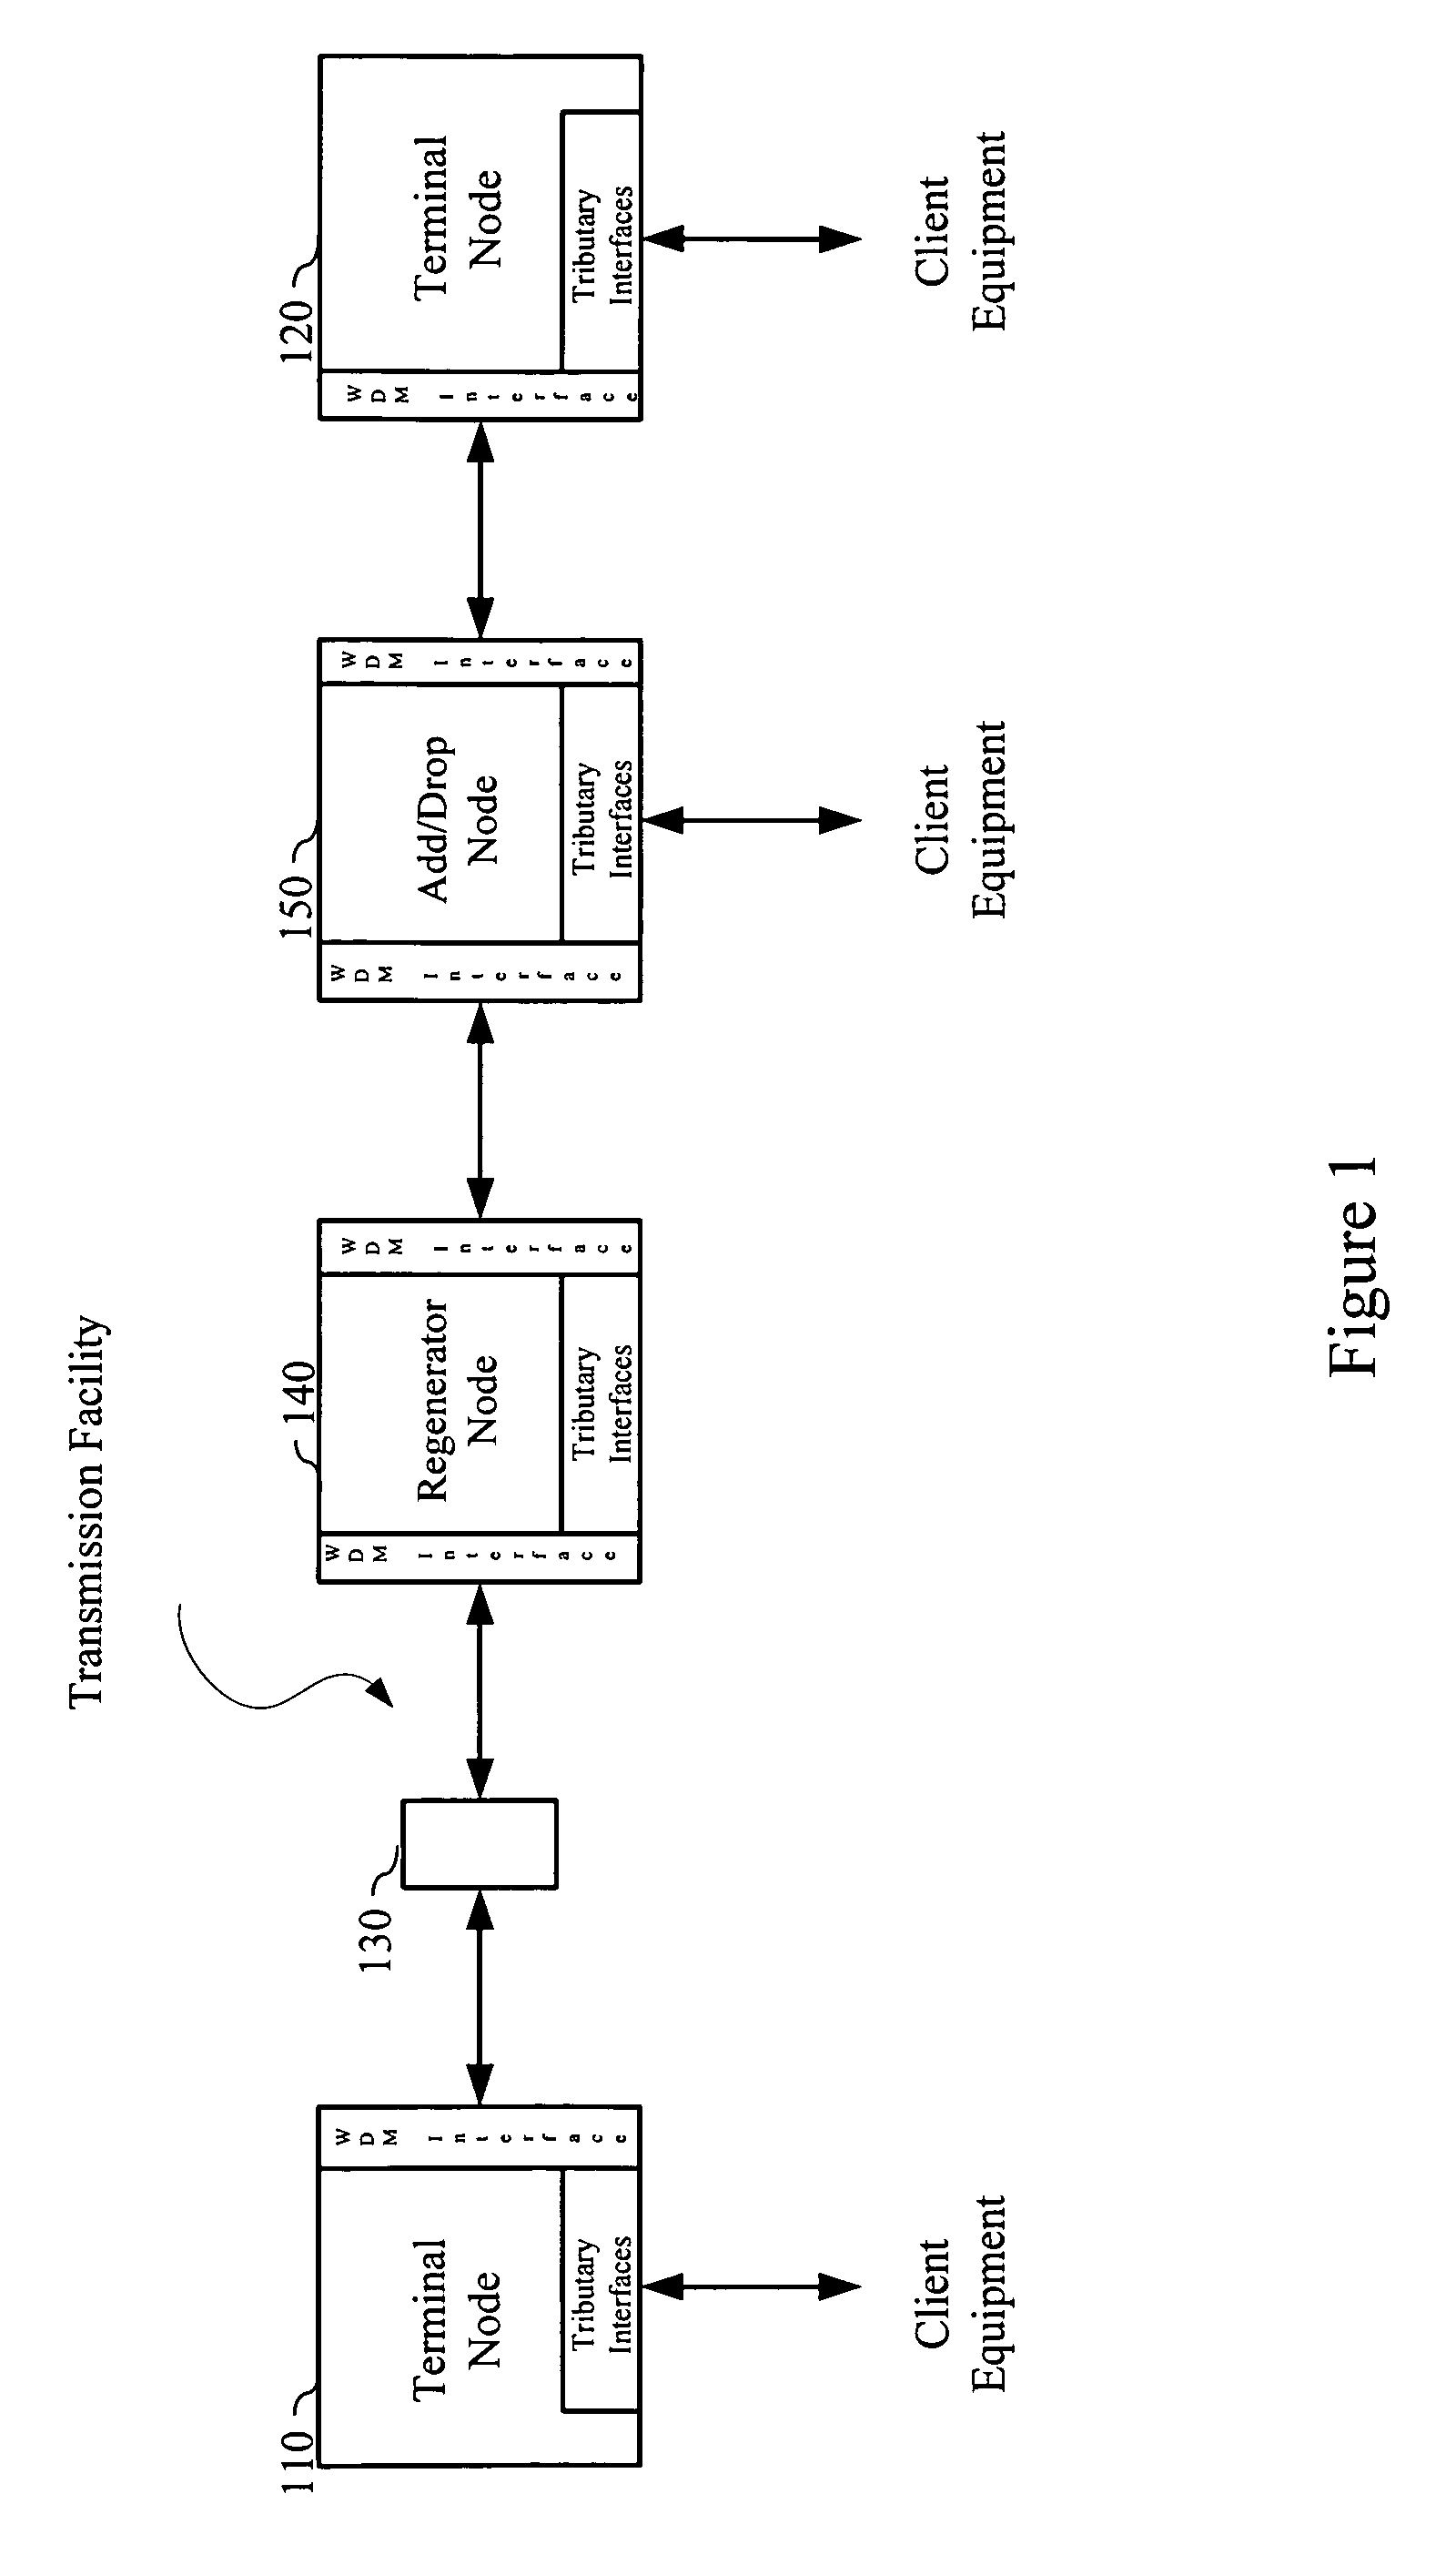 Modular adaptation and configuration of a network node architecture